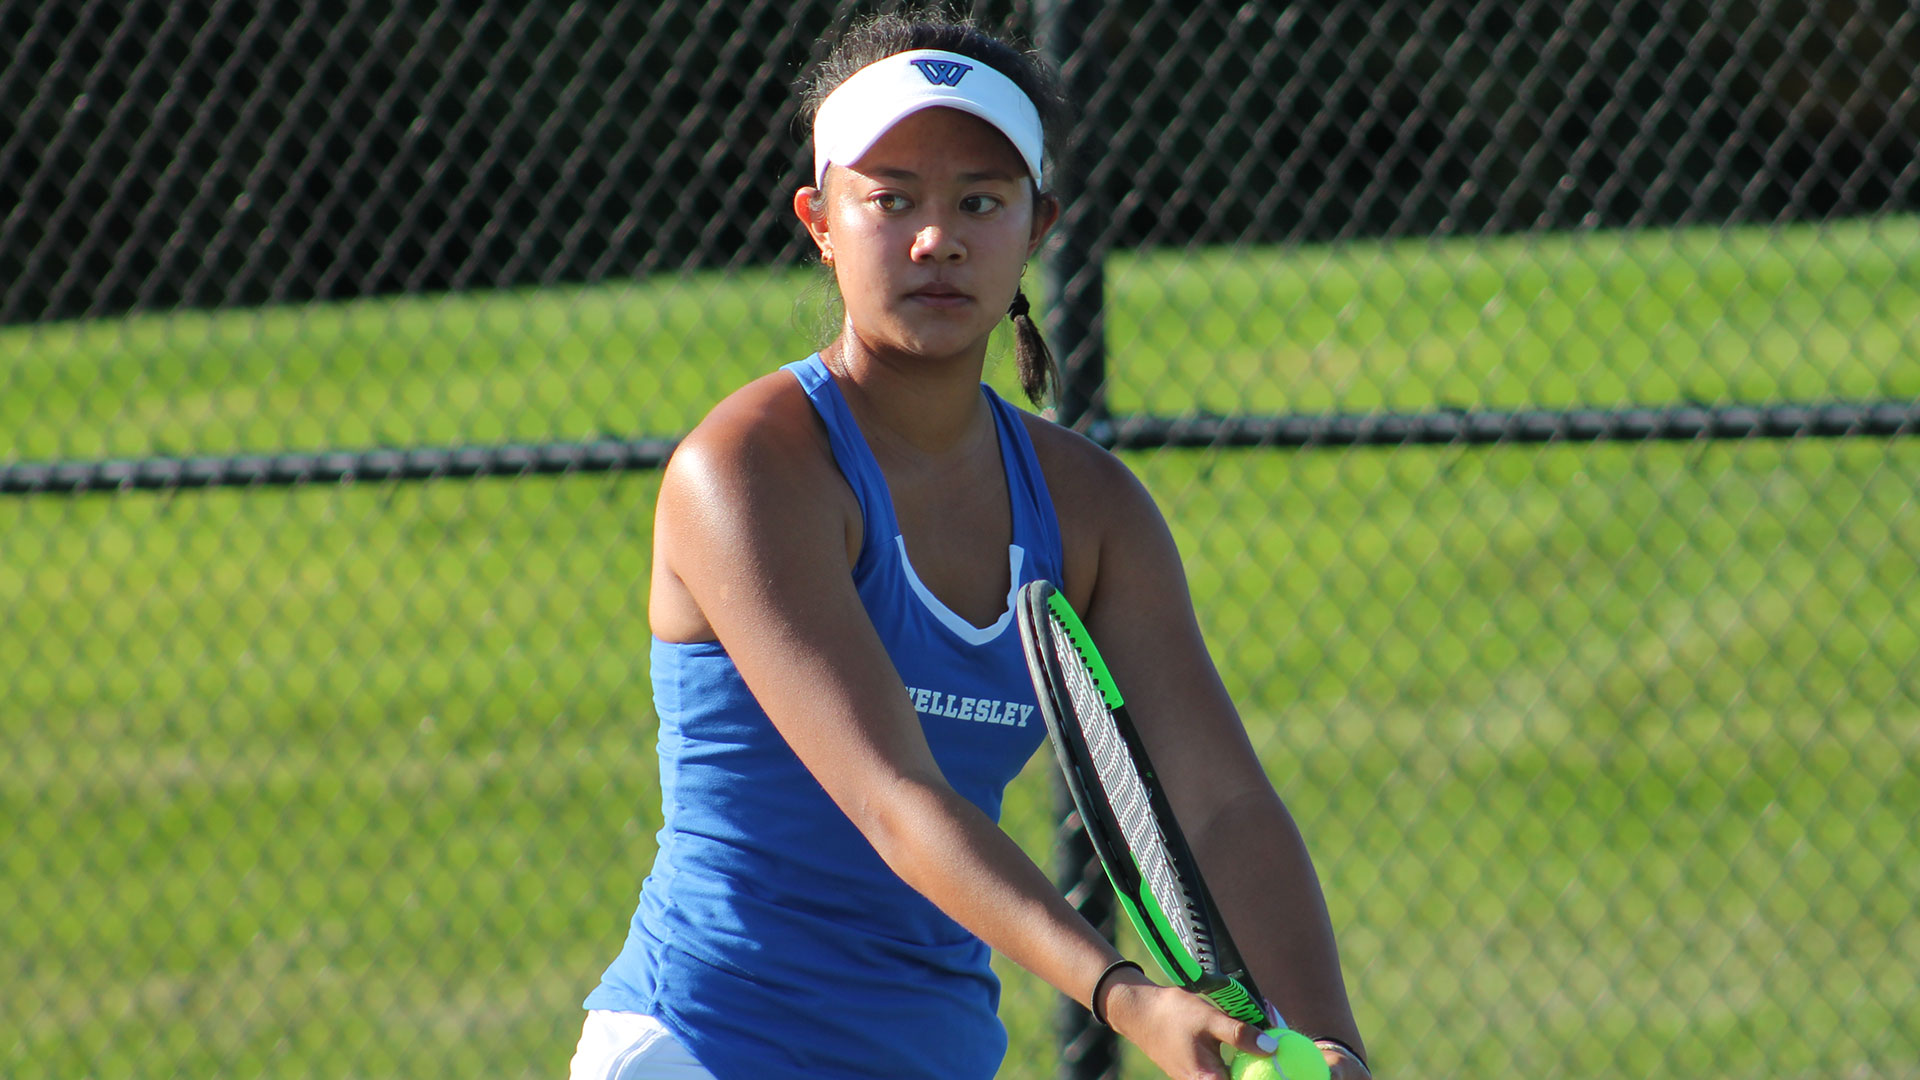 Alviar and Mu Compete at ITAs for Blue Tennis